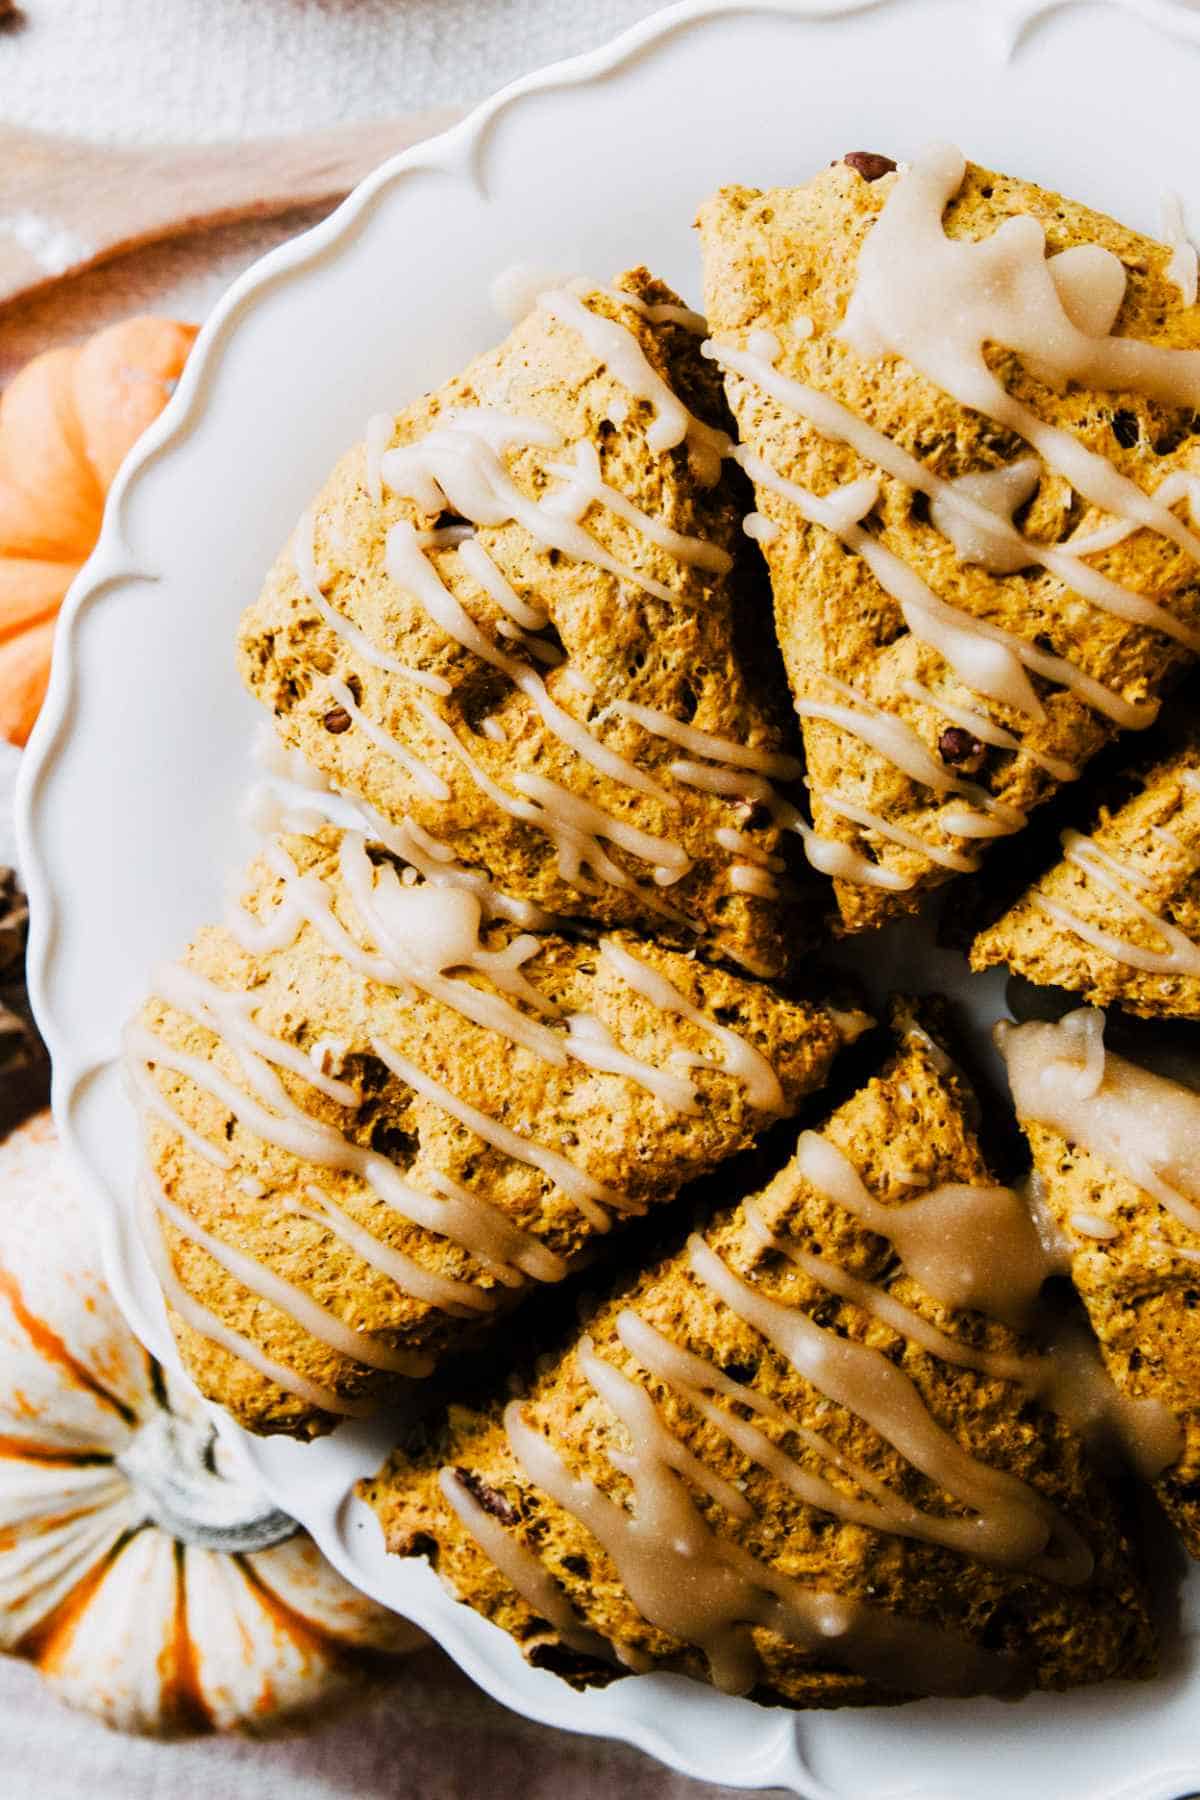 Pumpkin scones with maple icing on a platter.